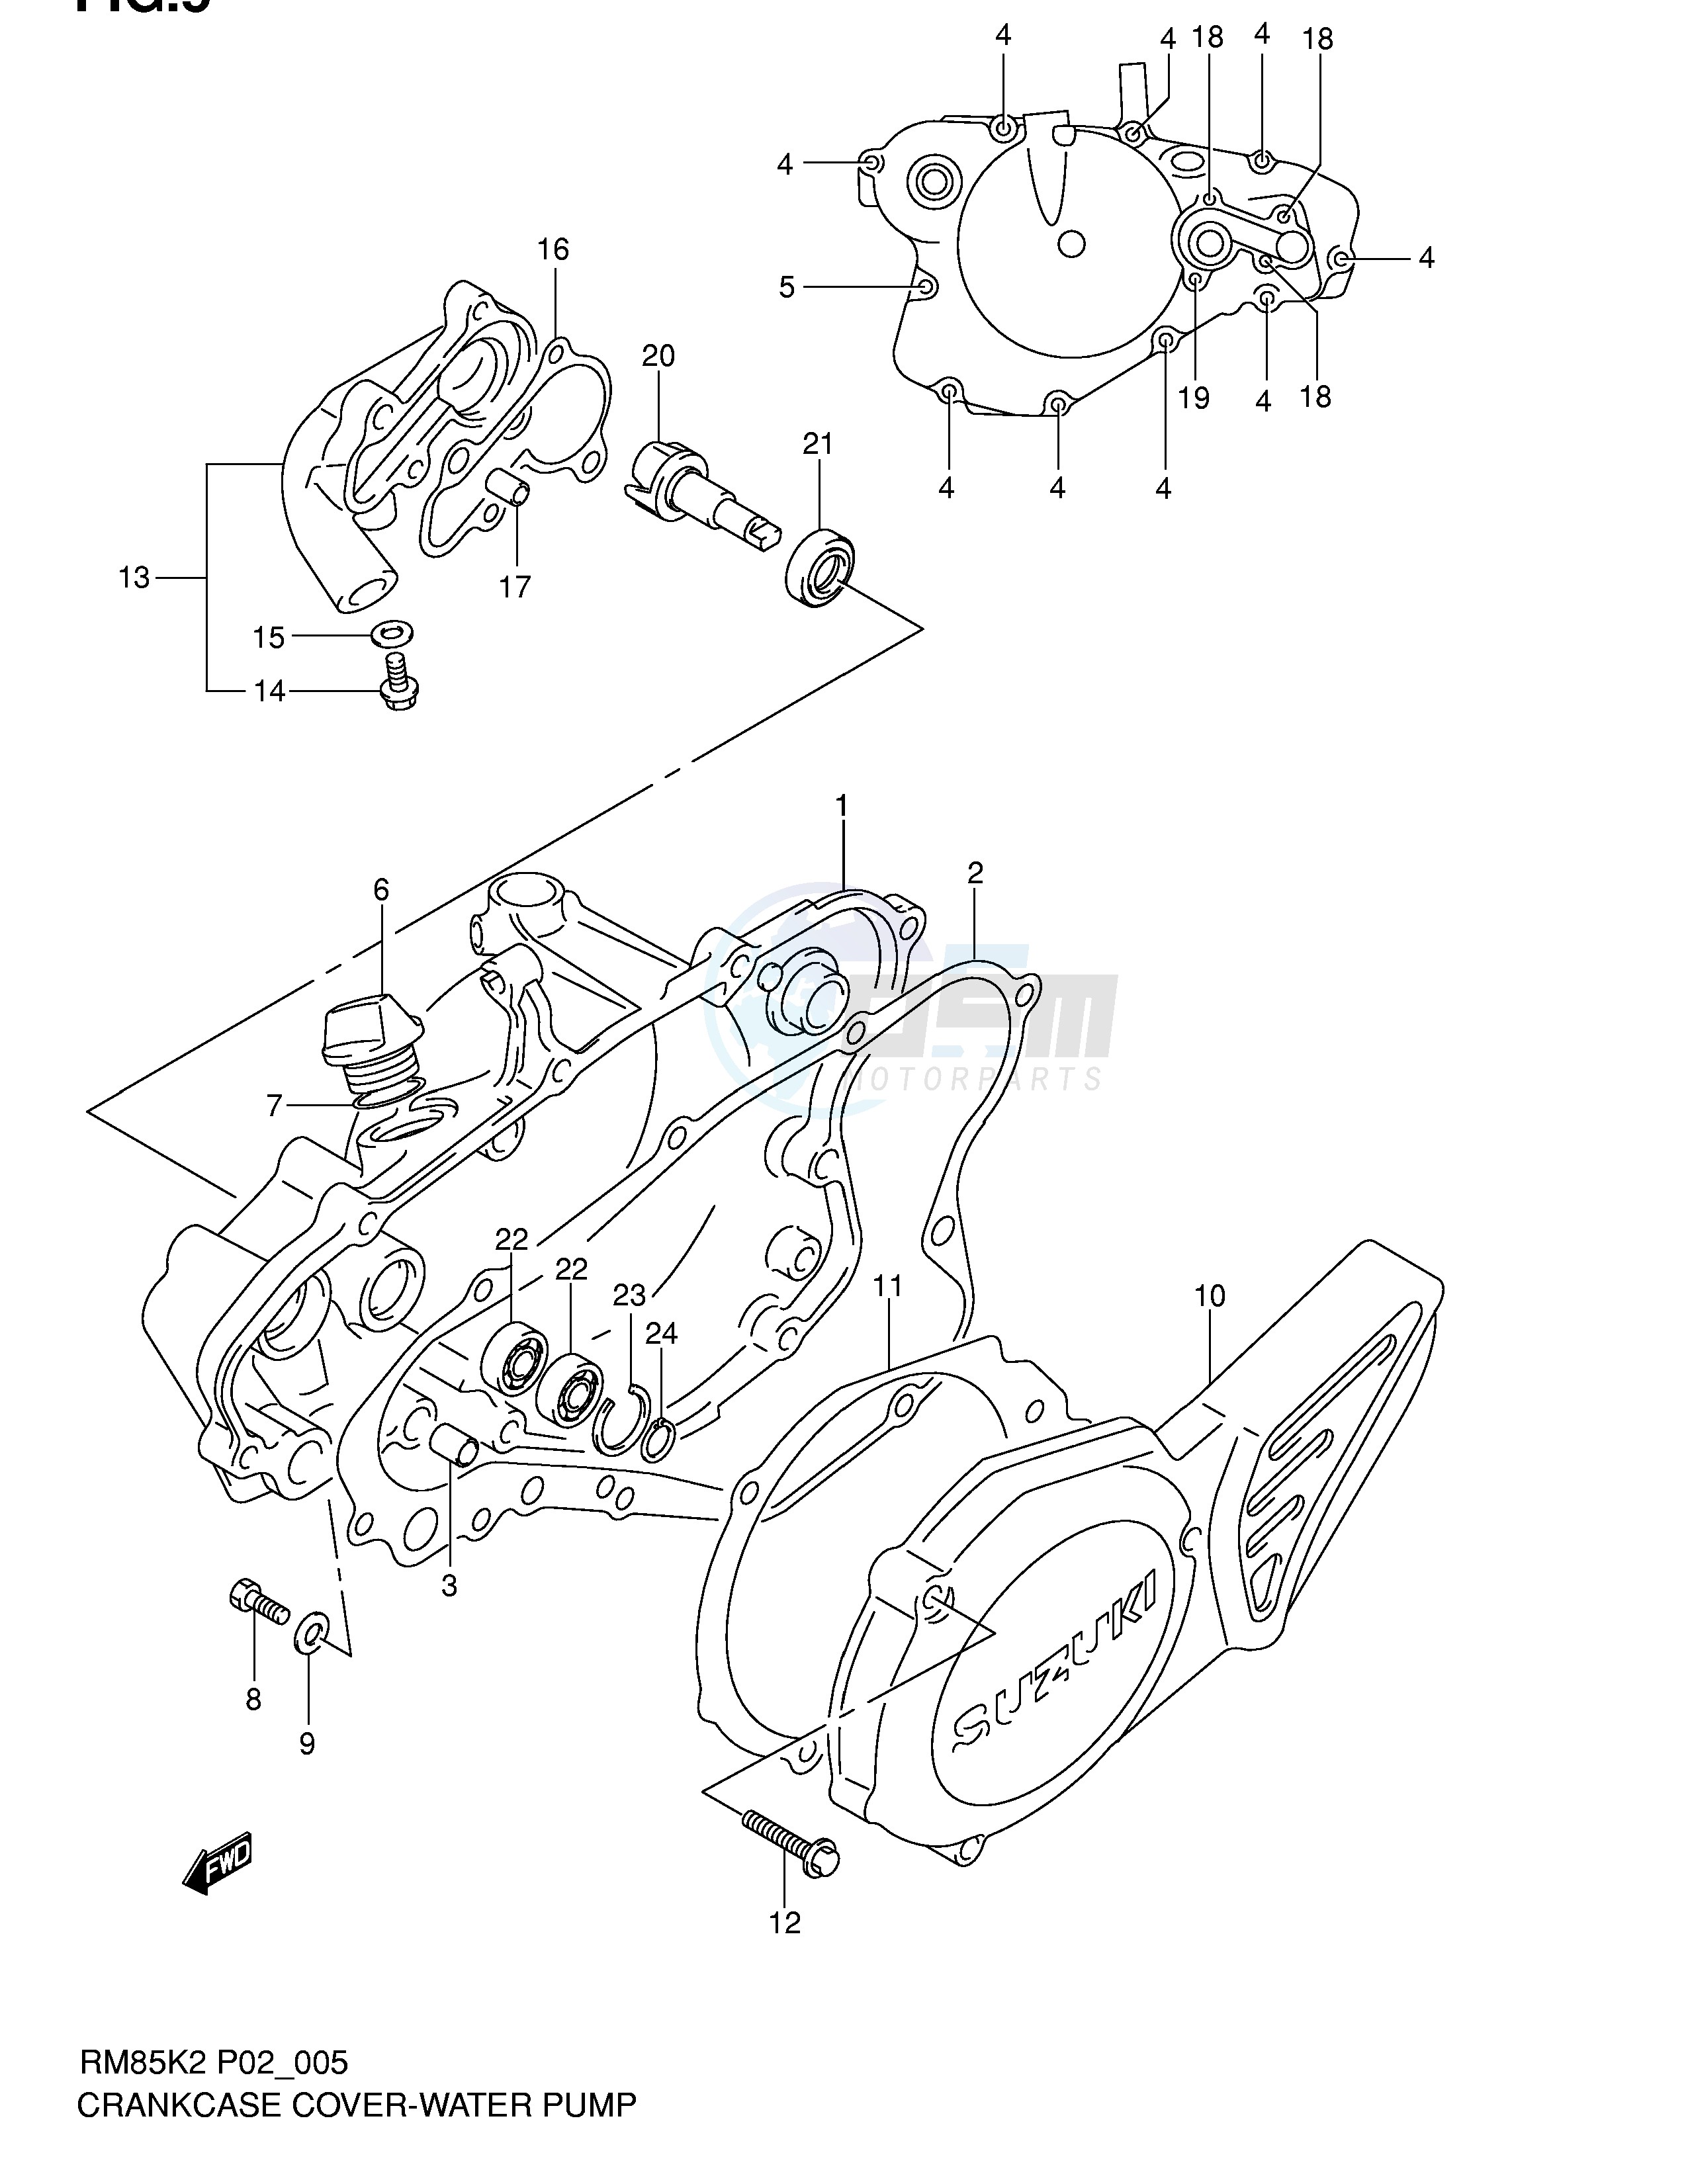 CRANKCASE COVER - WATER PUMP image